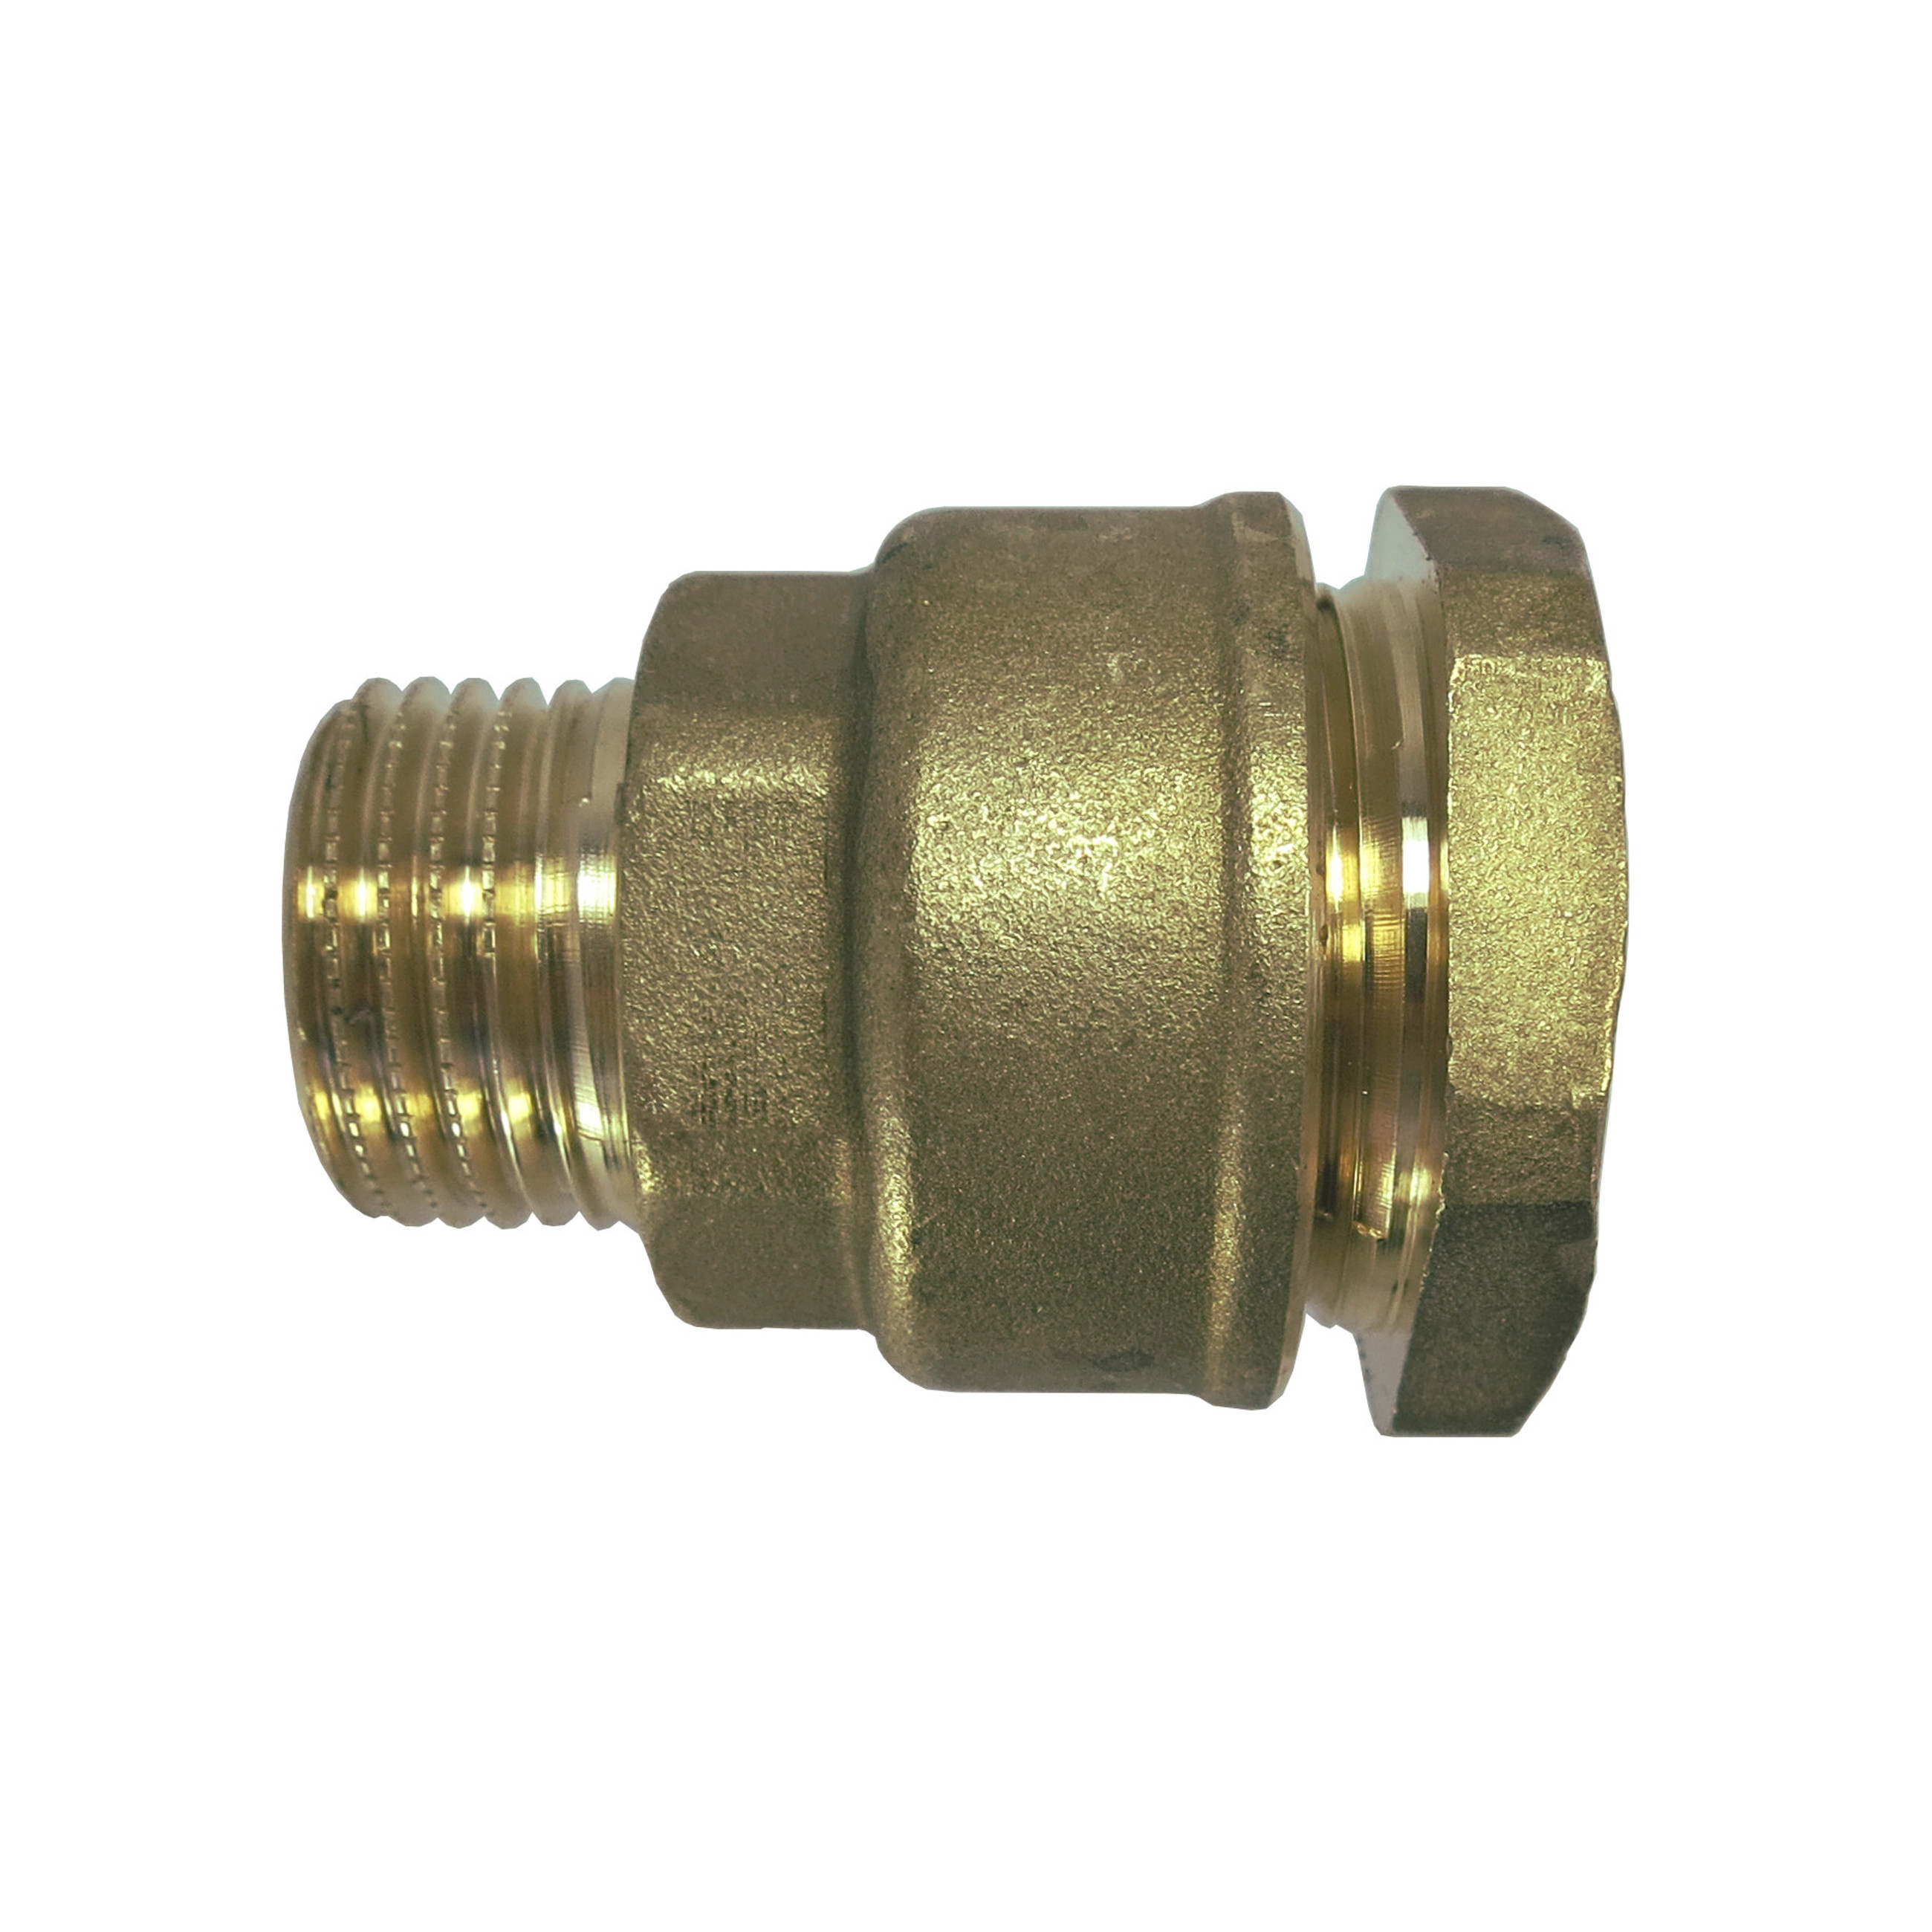 Male Fitting 1/2"BSP Brass Compression Fittings,Outside Tap Wall Plate Elbow F 